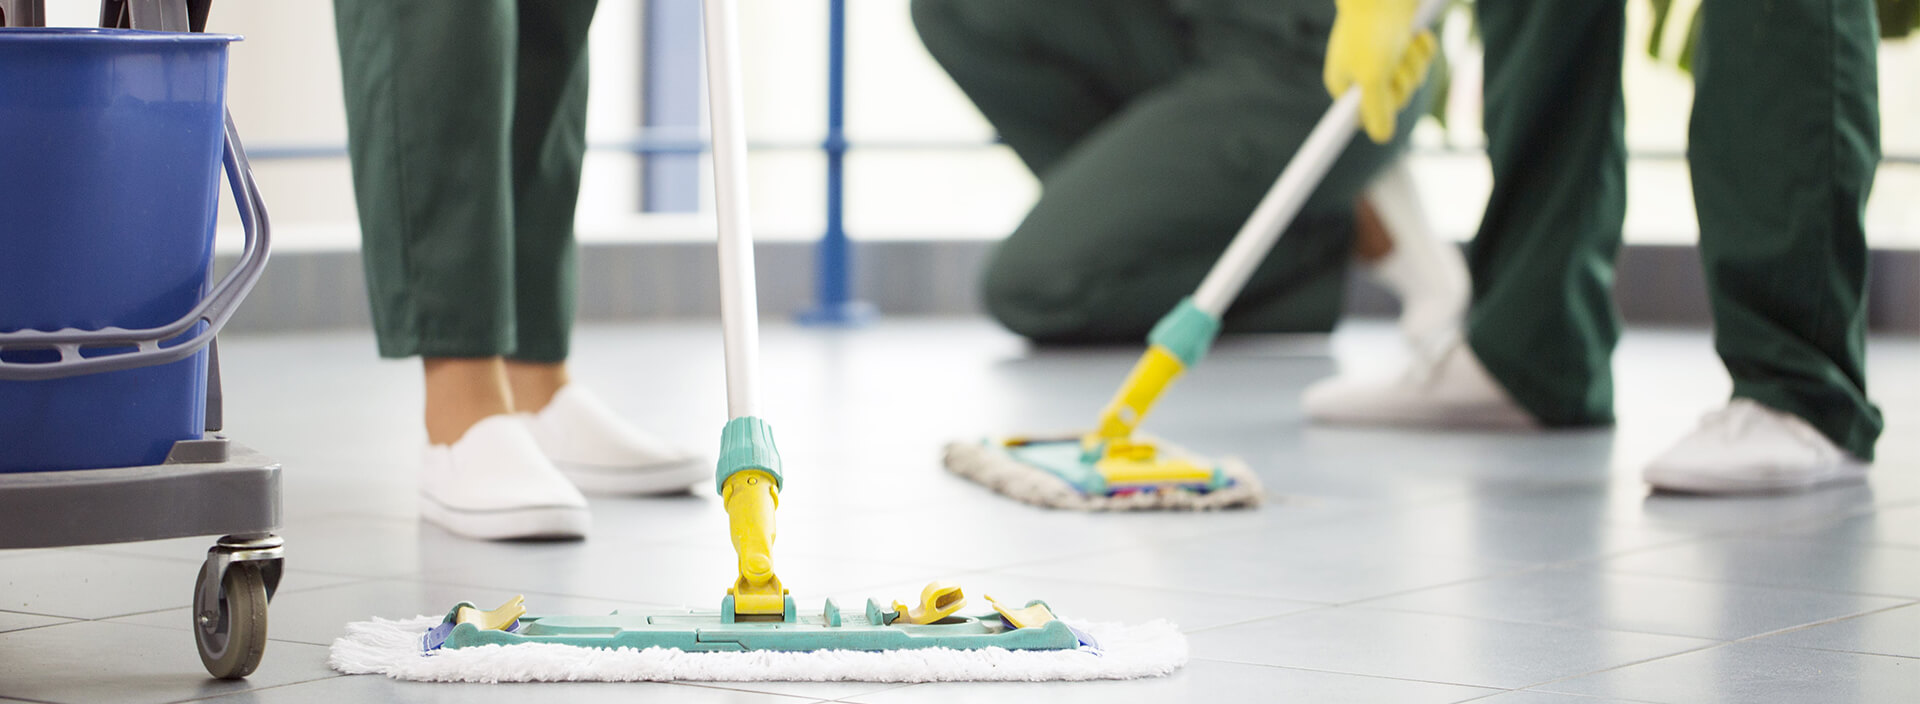 San Diego Cleaning Services, Janitorial Services and Commercial Cleaning Services